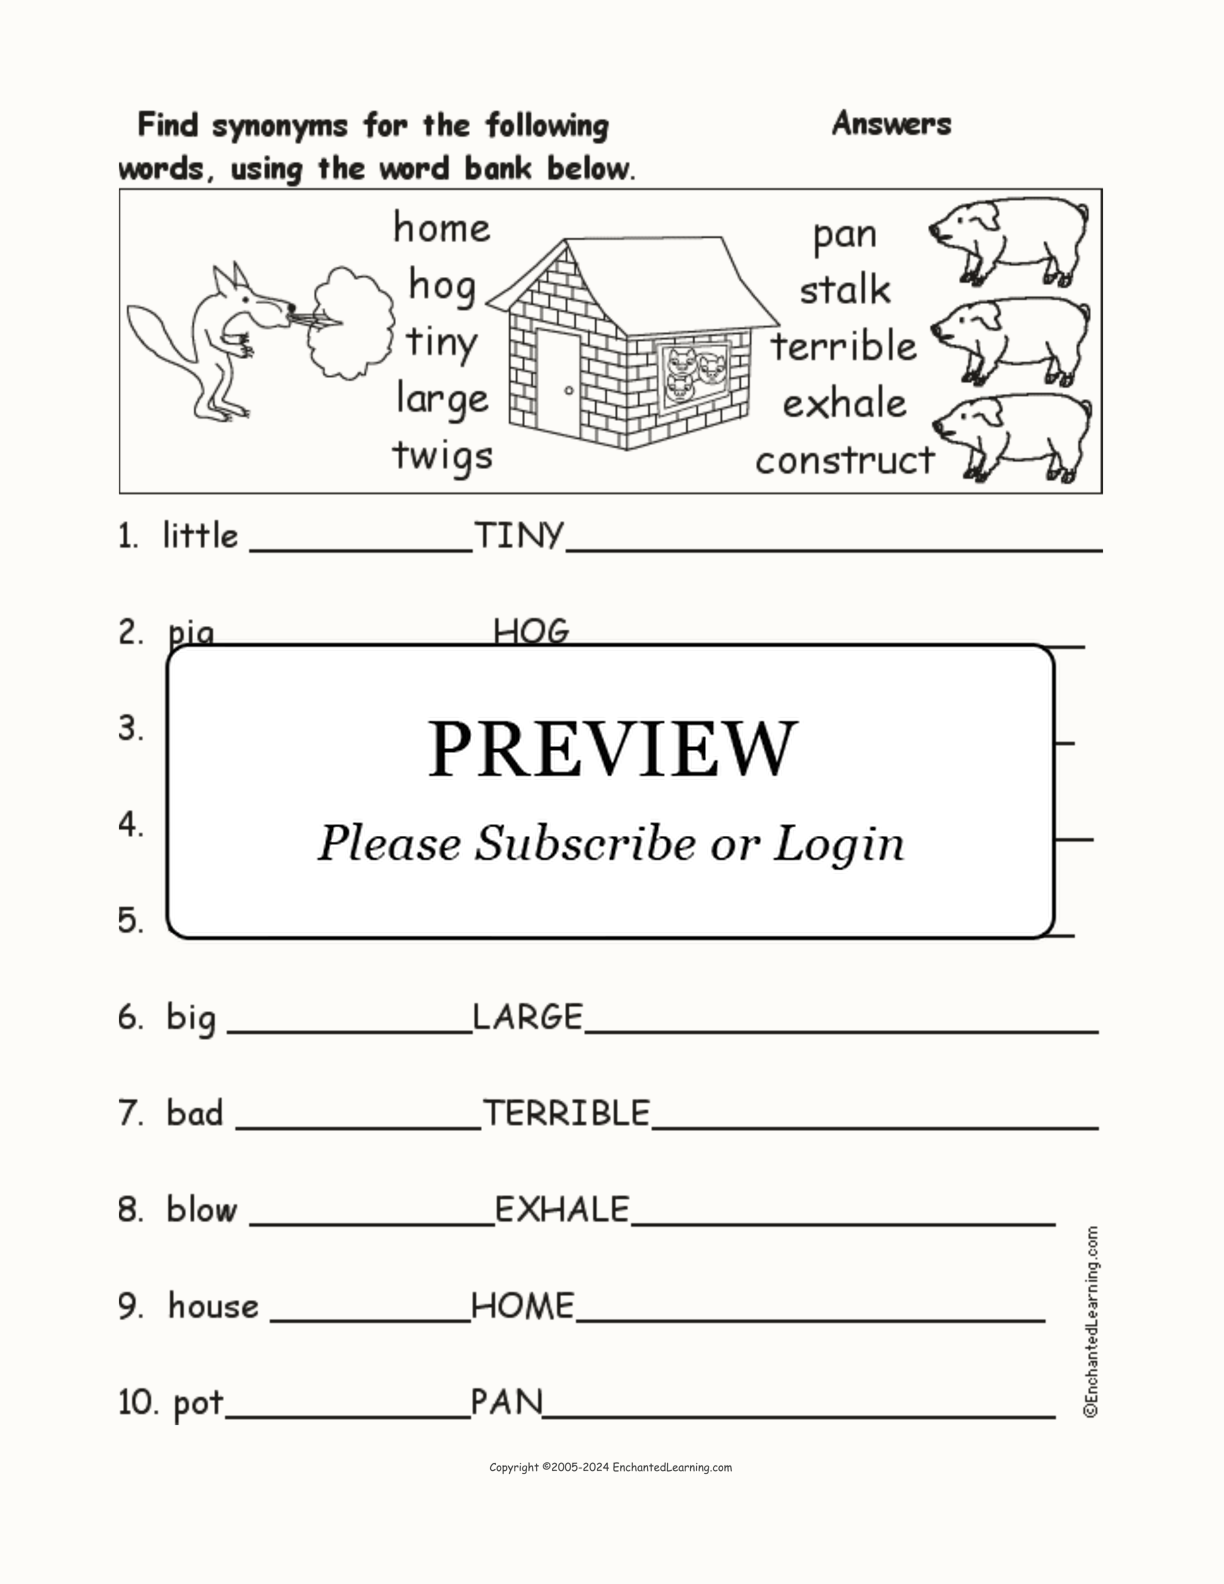 'Three Little Pigs' Synonyms interactive worksheet page 2